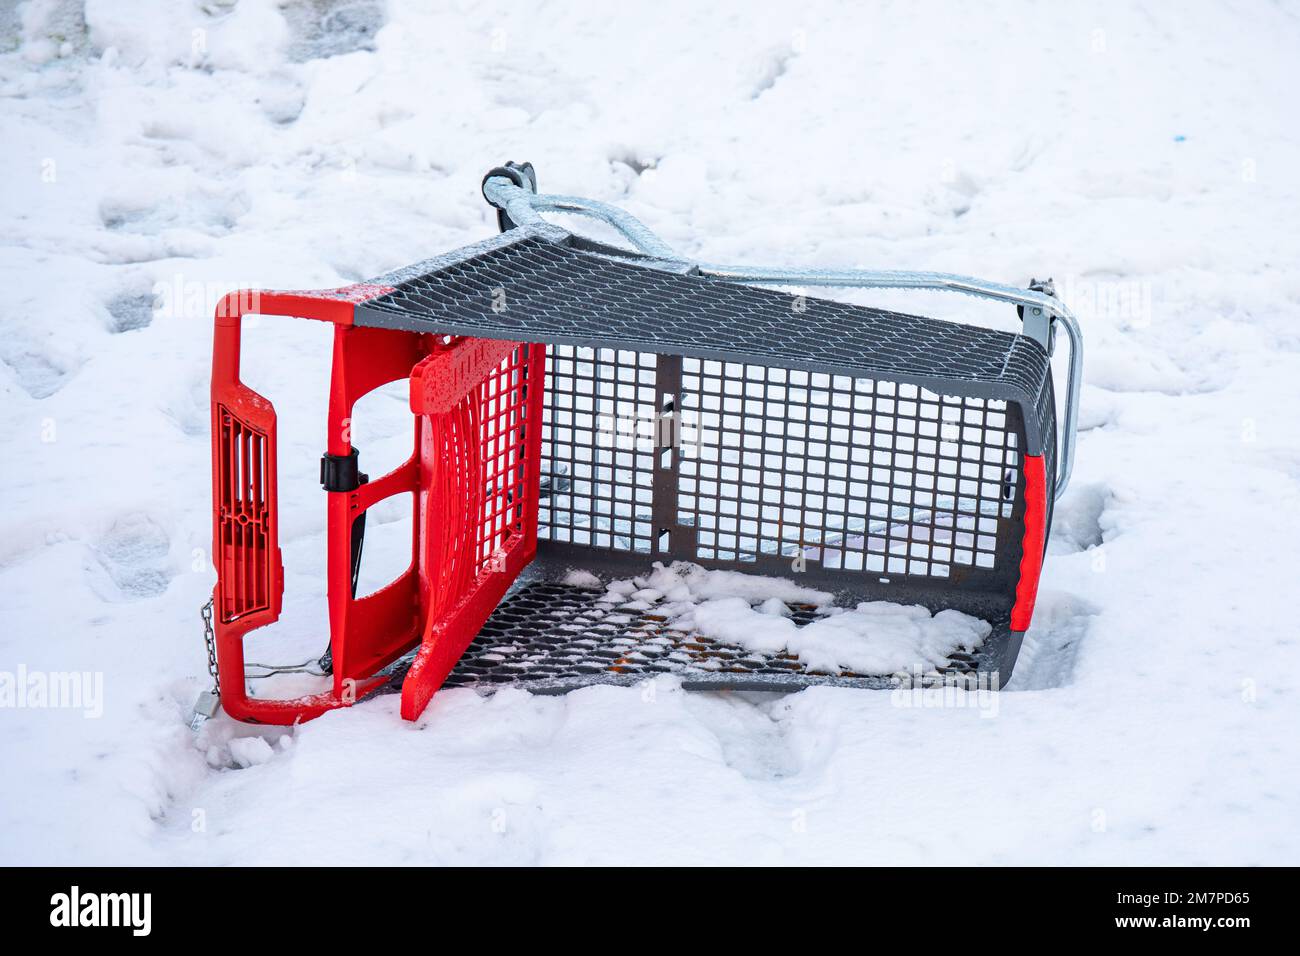 Overturned shopping cart or supermarket trolley in snow Stock Photo